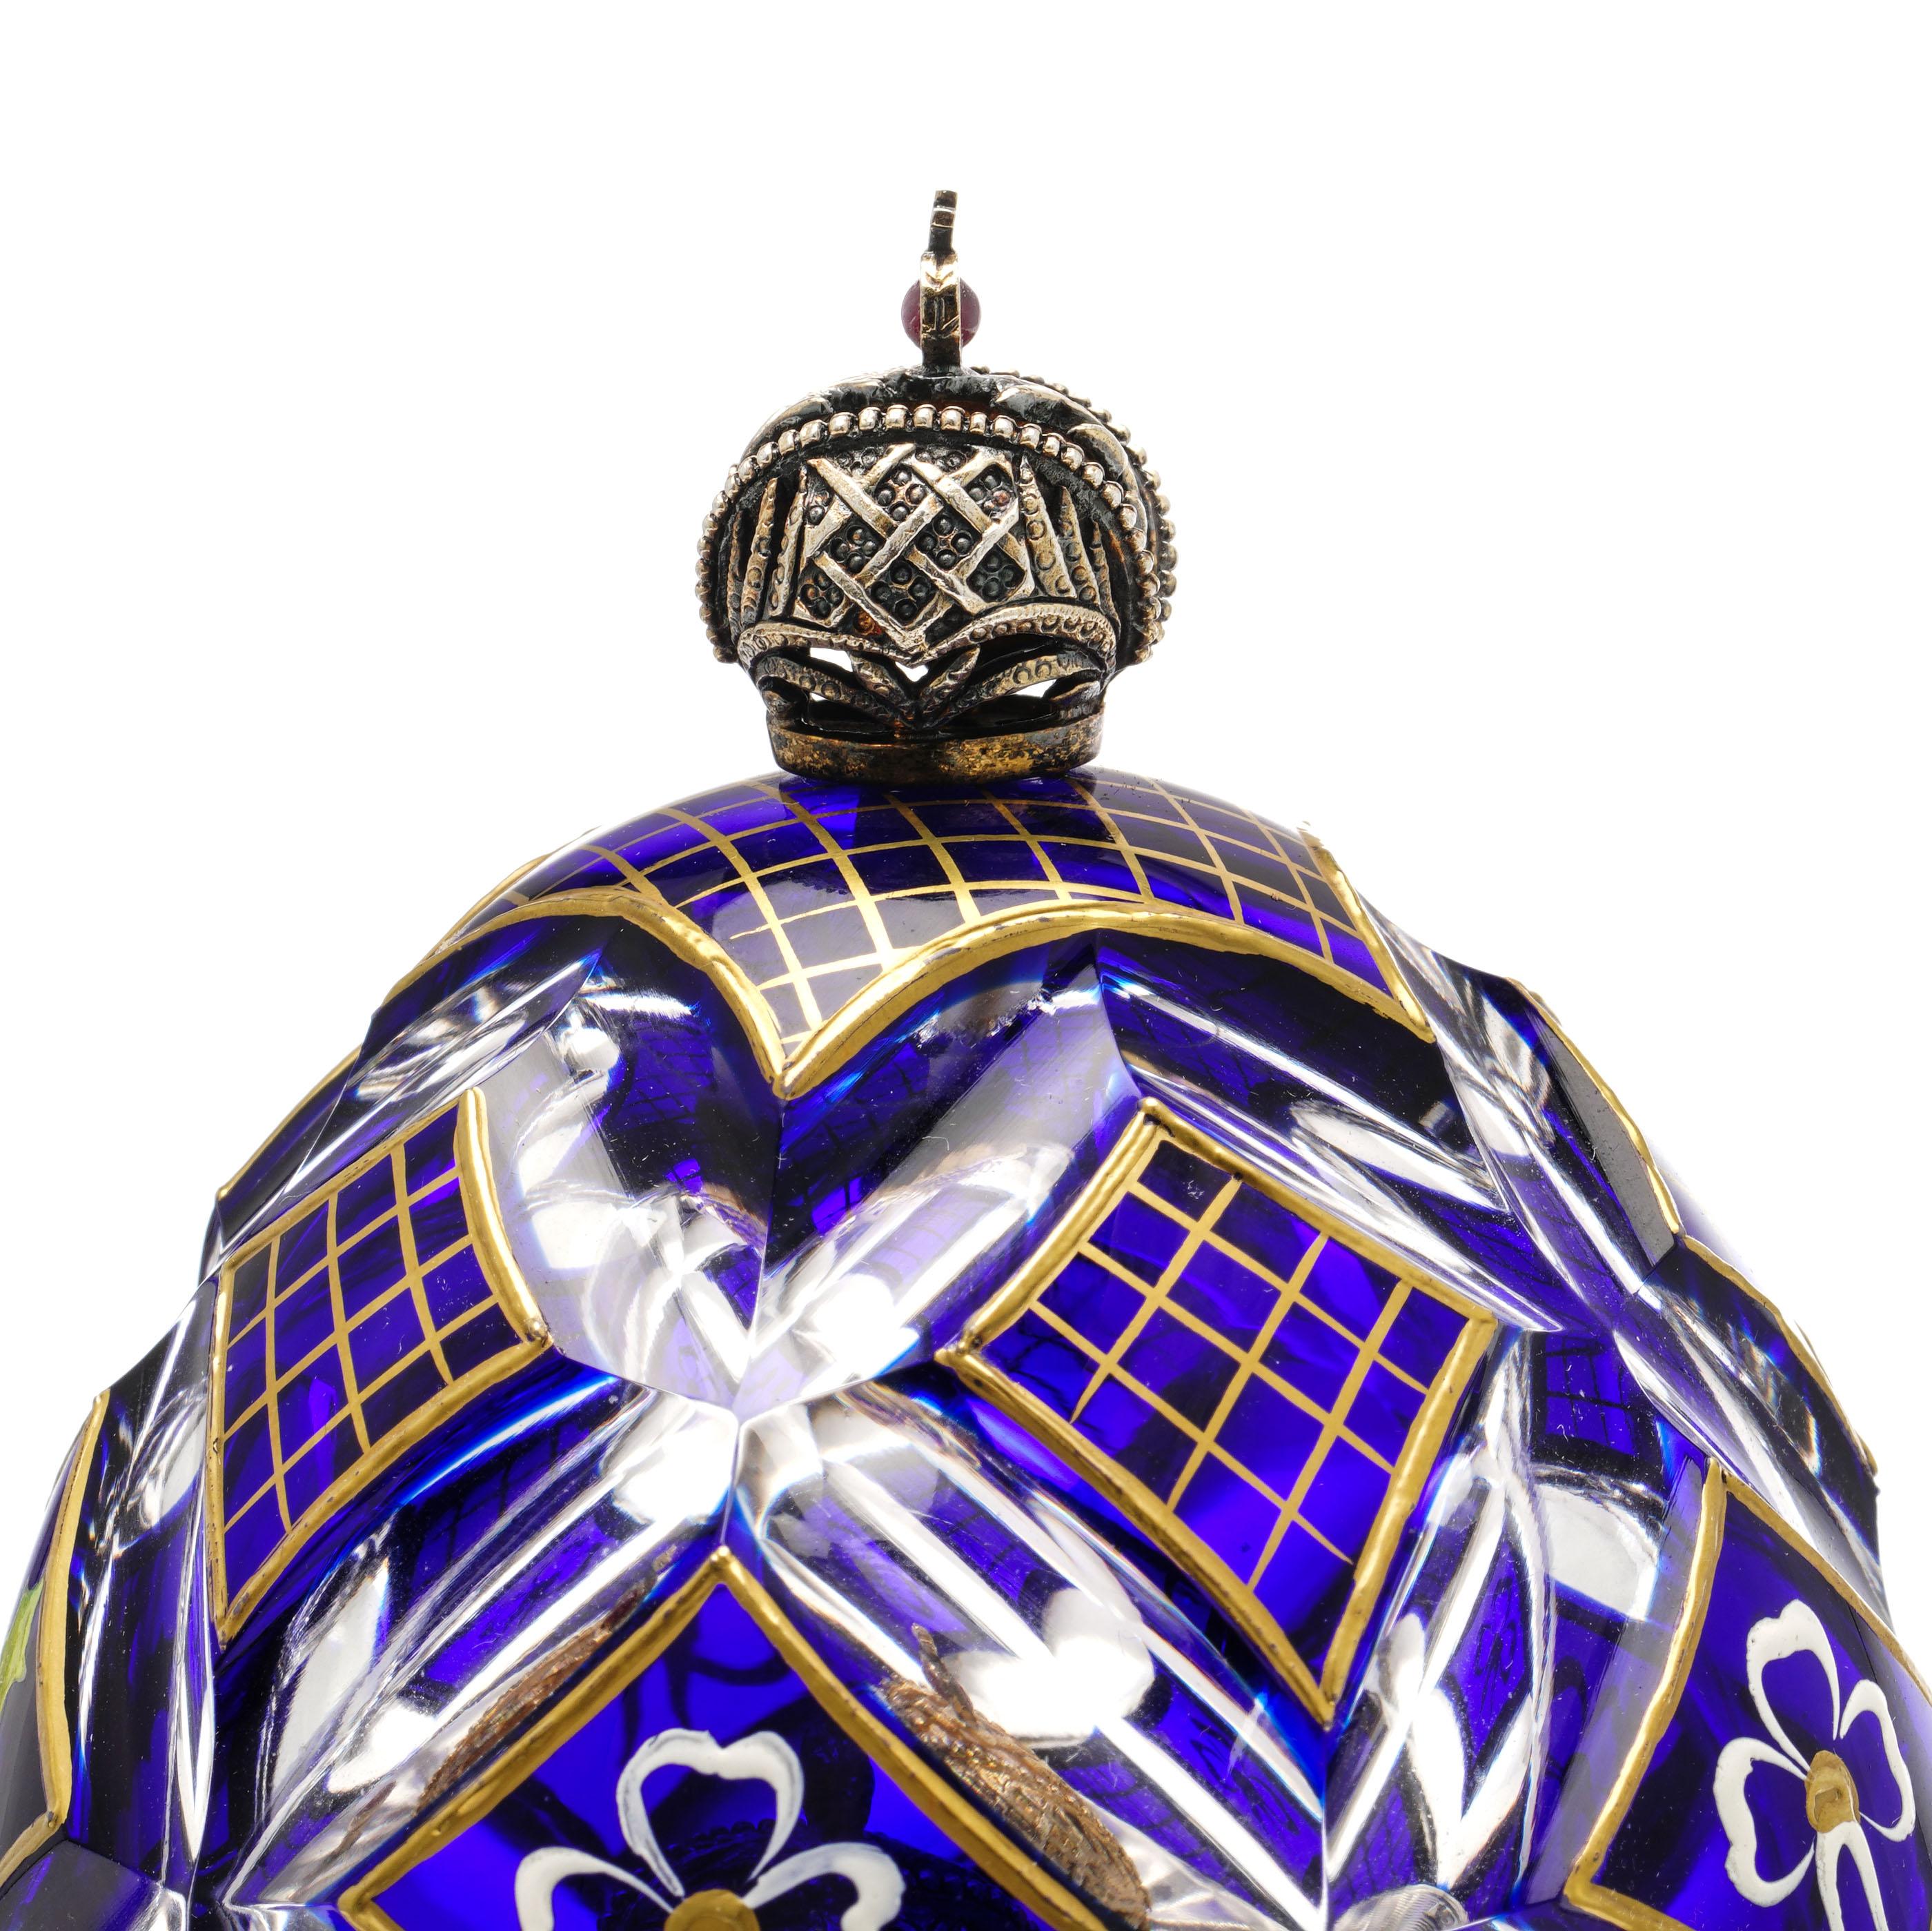 British Limited Edition Nr.124 the Winter Egg Music Box by Theo Faberge